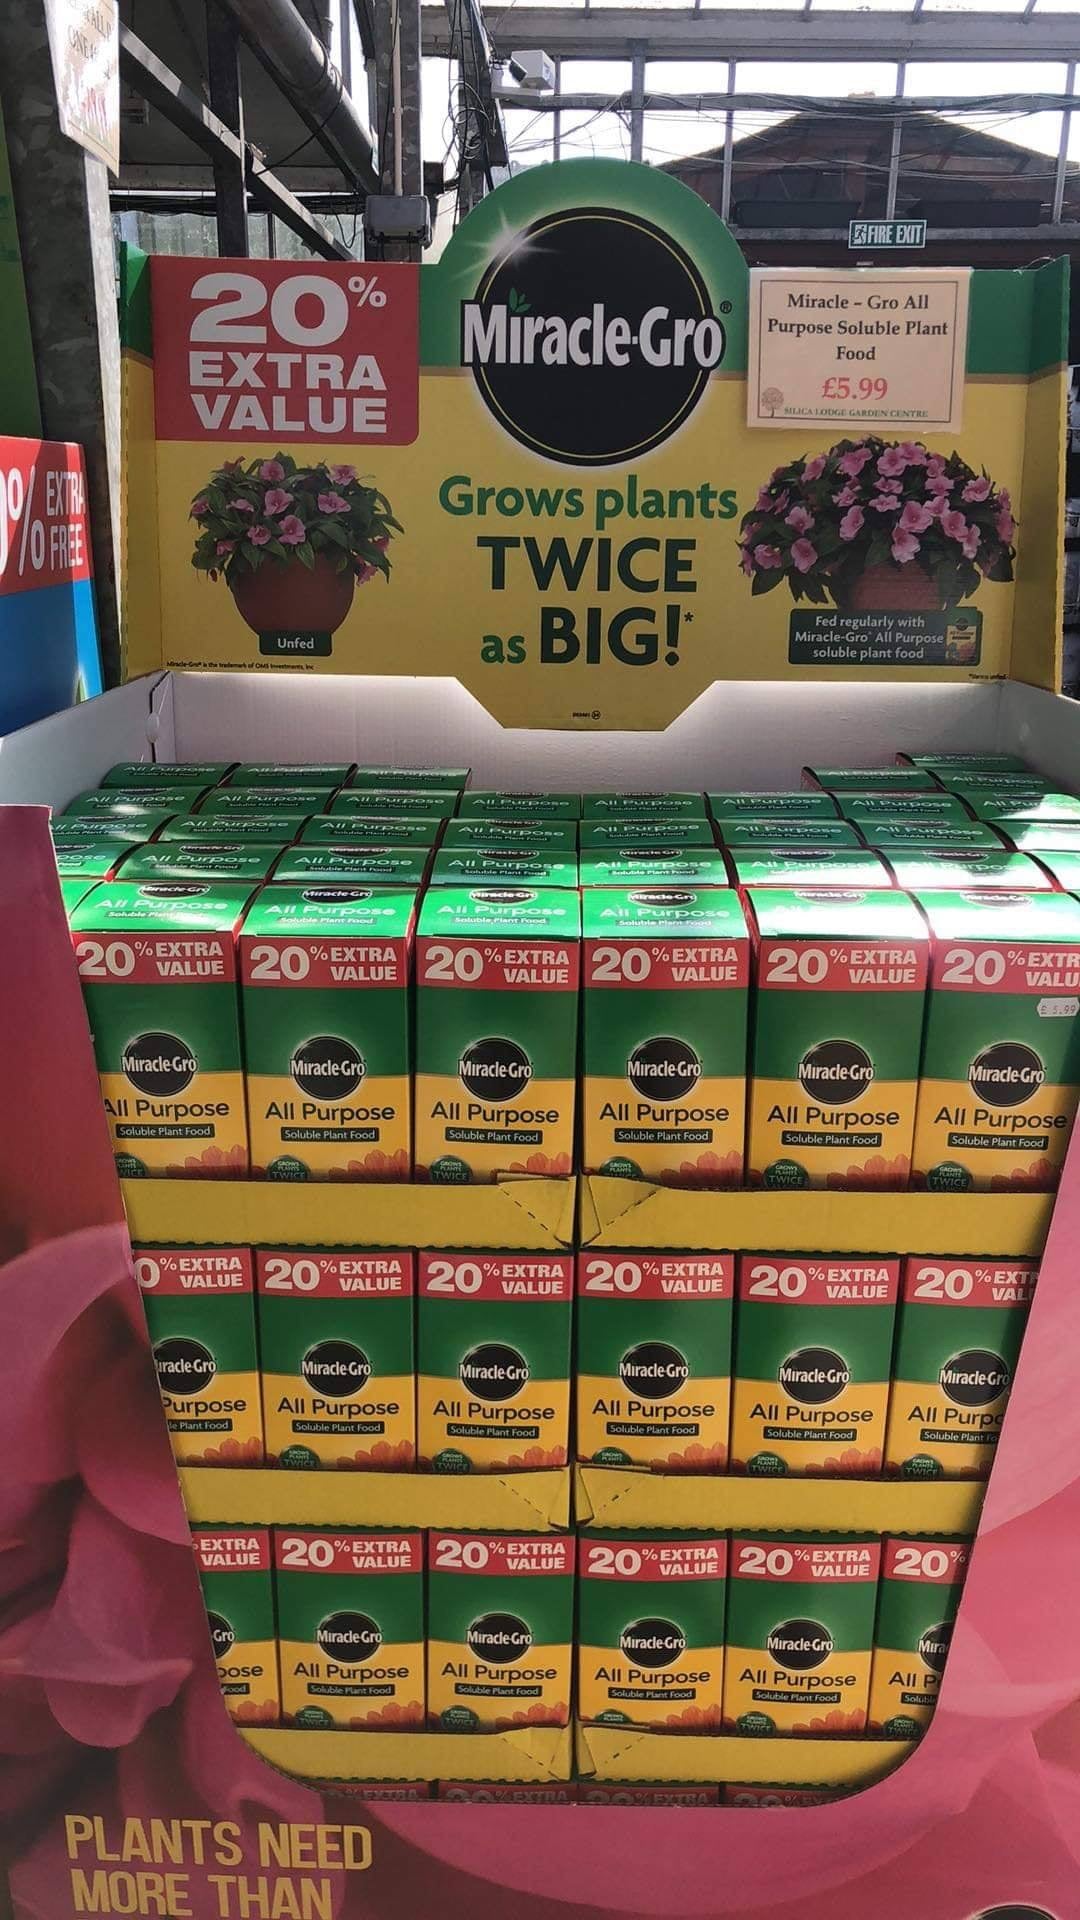 Miracle Gro All purpose soluble plant food 1KG +20 % extra free